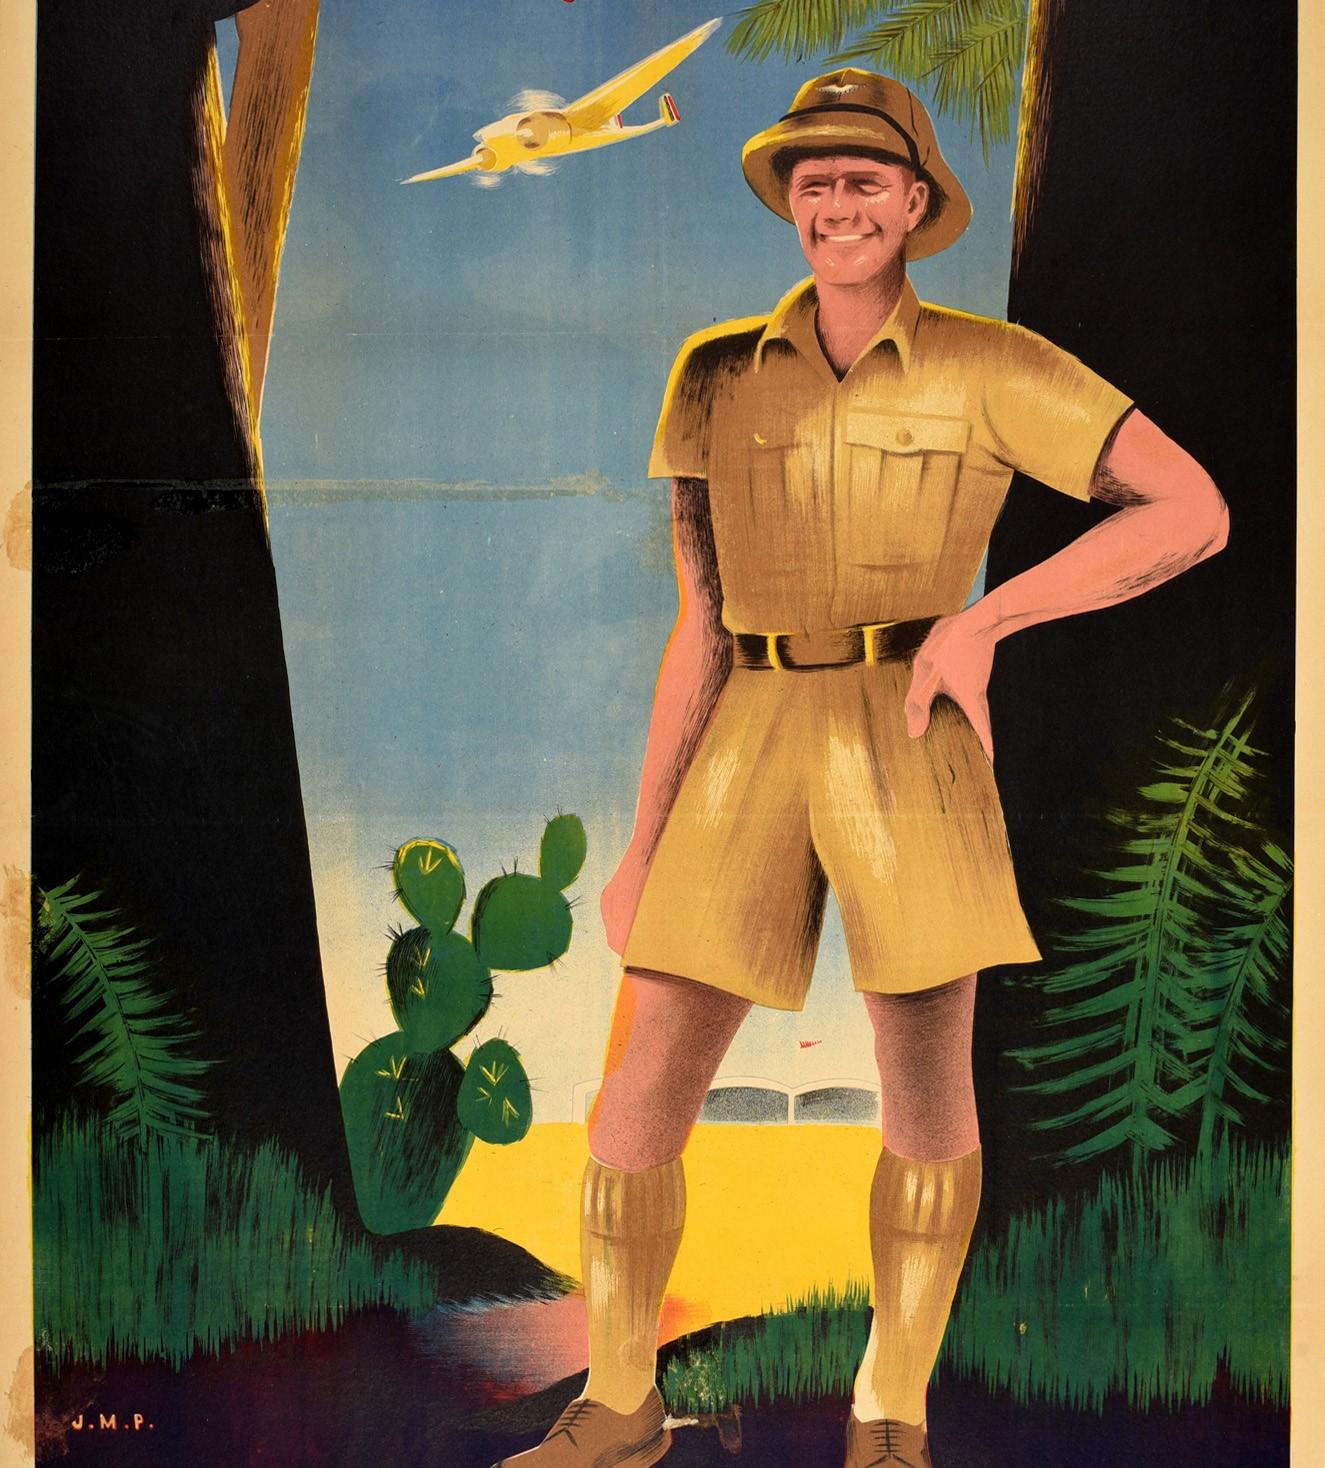 join the army poster